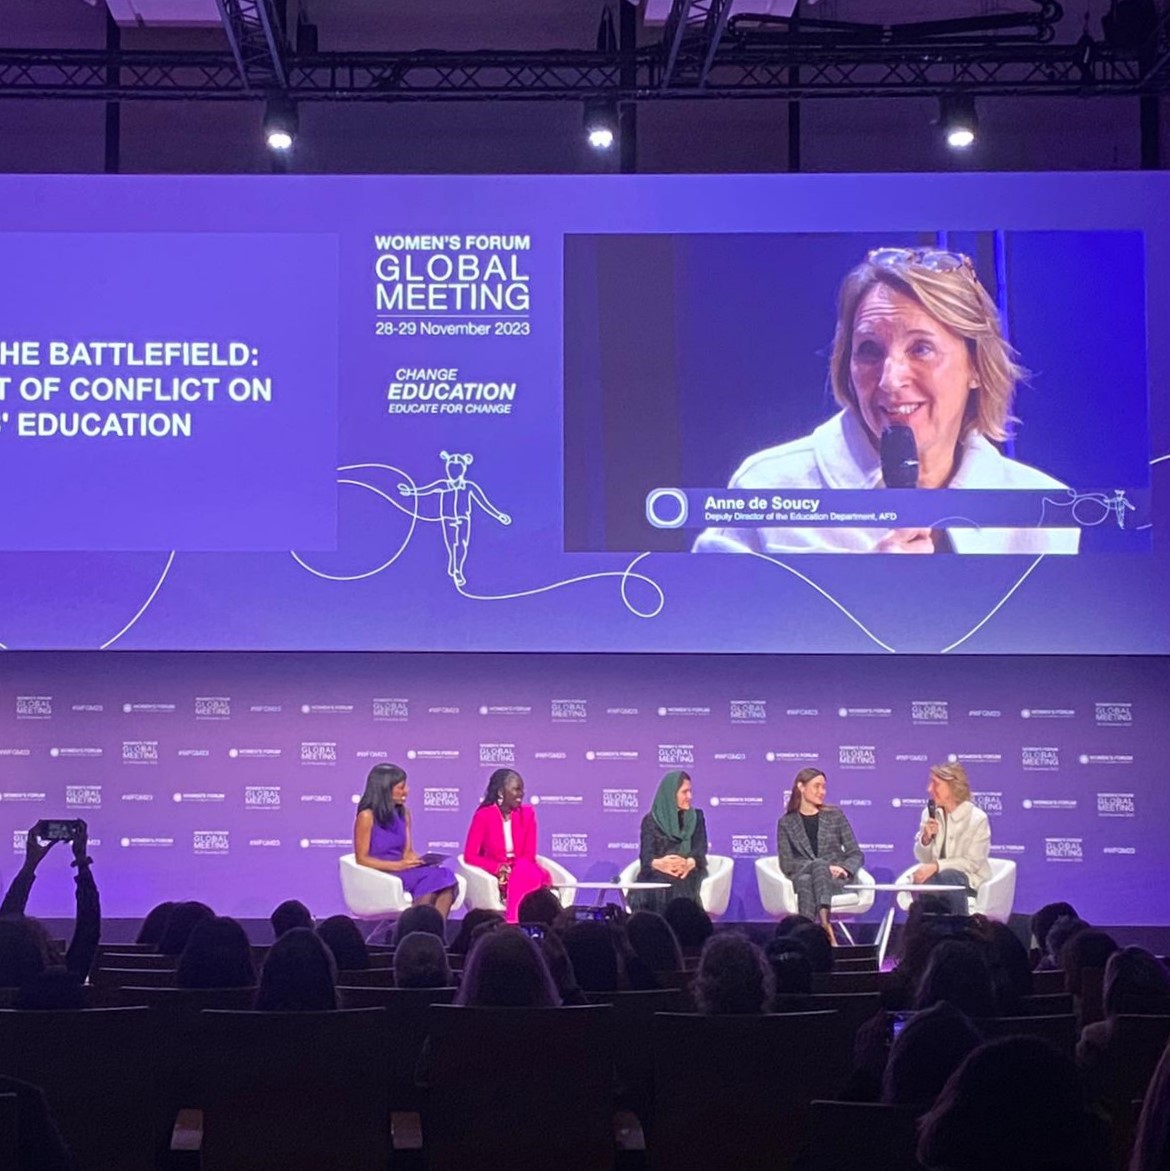 💬#WomensForum | 'Education is one of the strongest vectors to prevent and to resolve crisis and conflicts'

At the @Womens_Forum, @AnnedeSoucy1 explained our action to ensure education for girls in conflict zones, notably through the #MinkaFund.